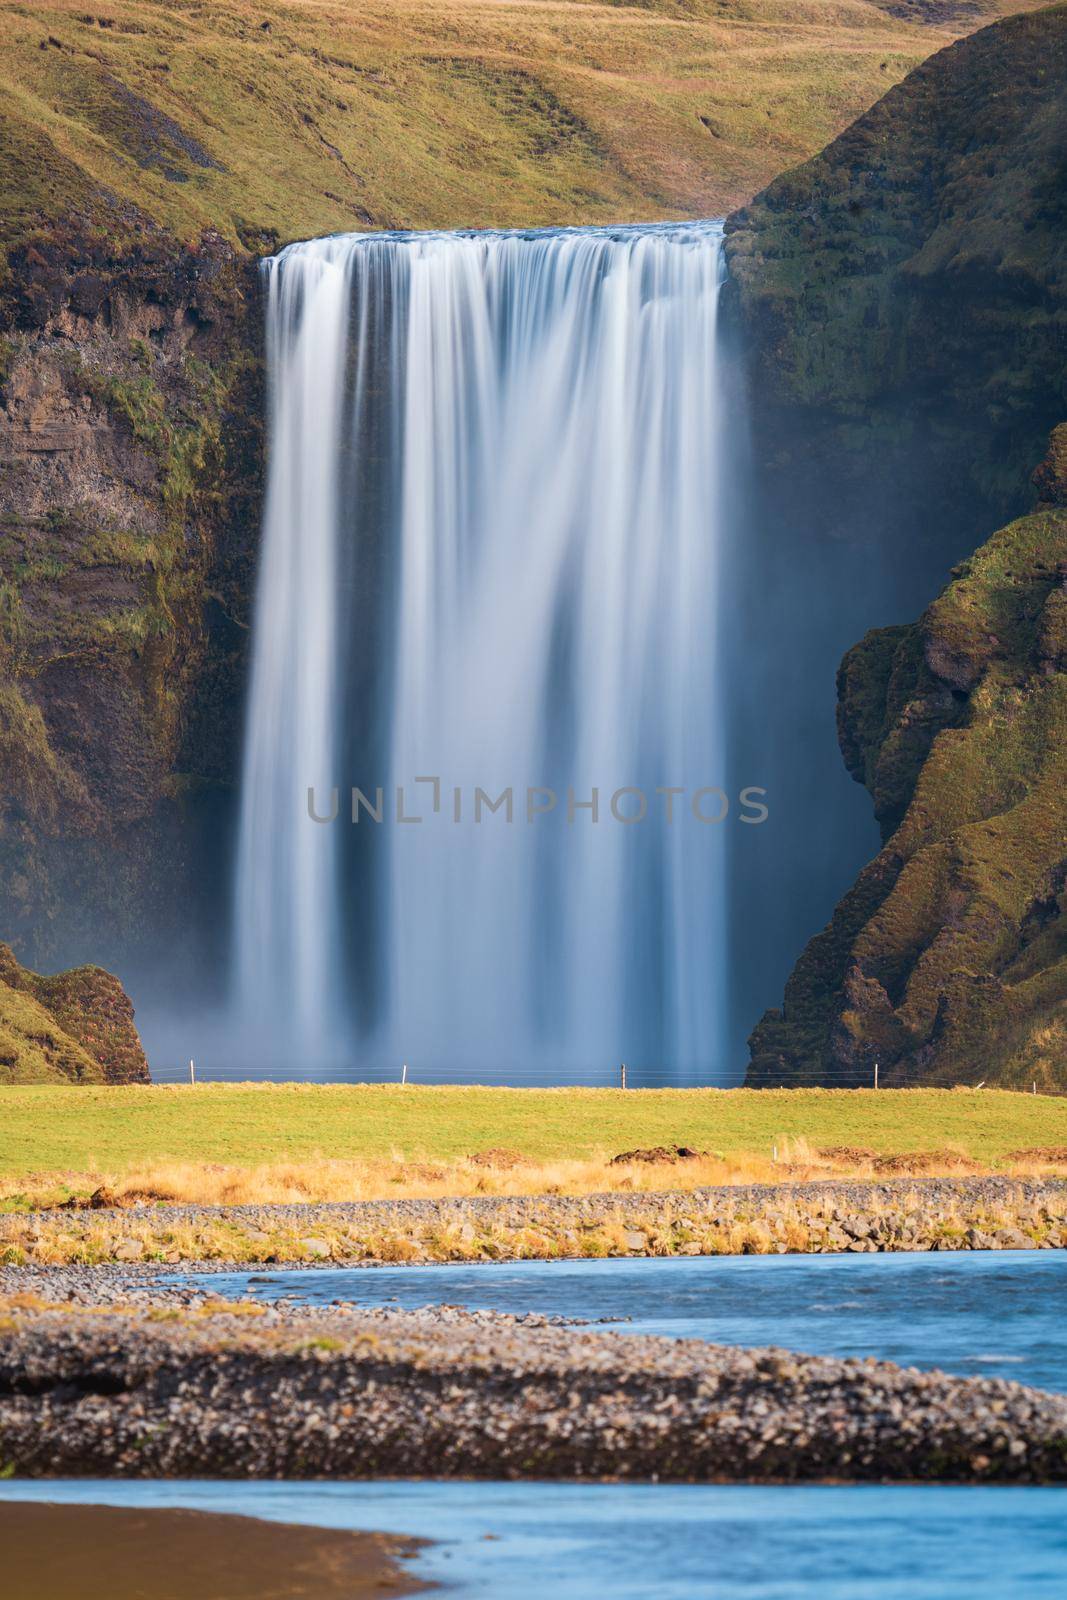 Long exposure of famous Skogafoss waterfall from the distance with no people by FerradalFCG